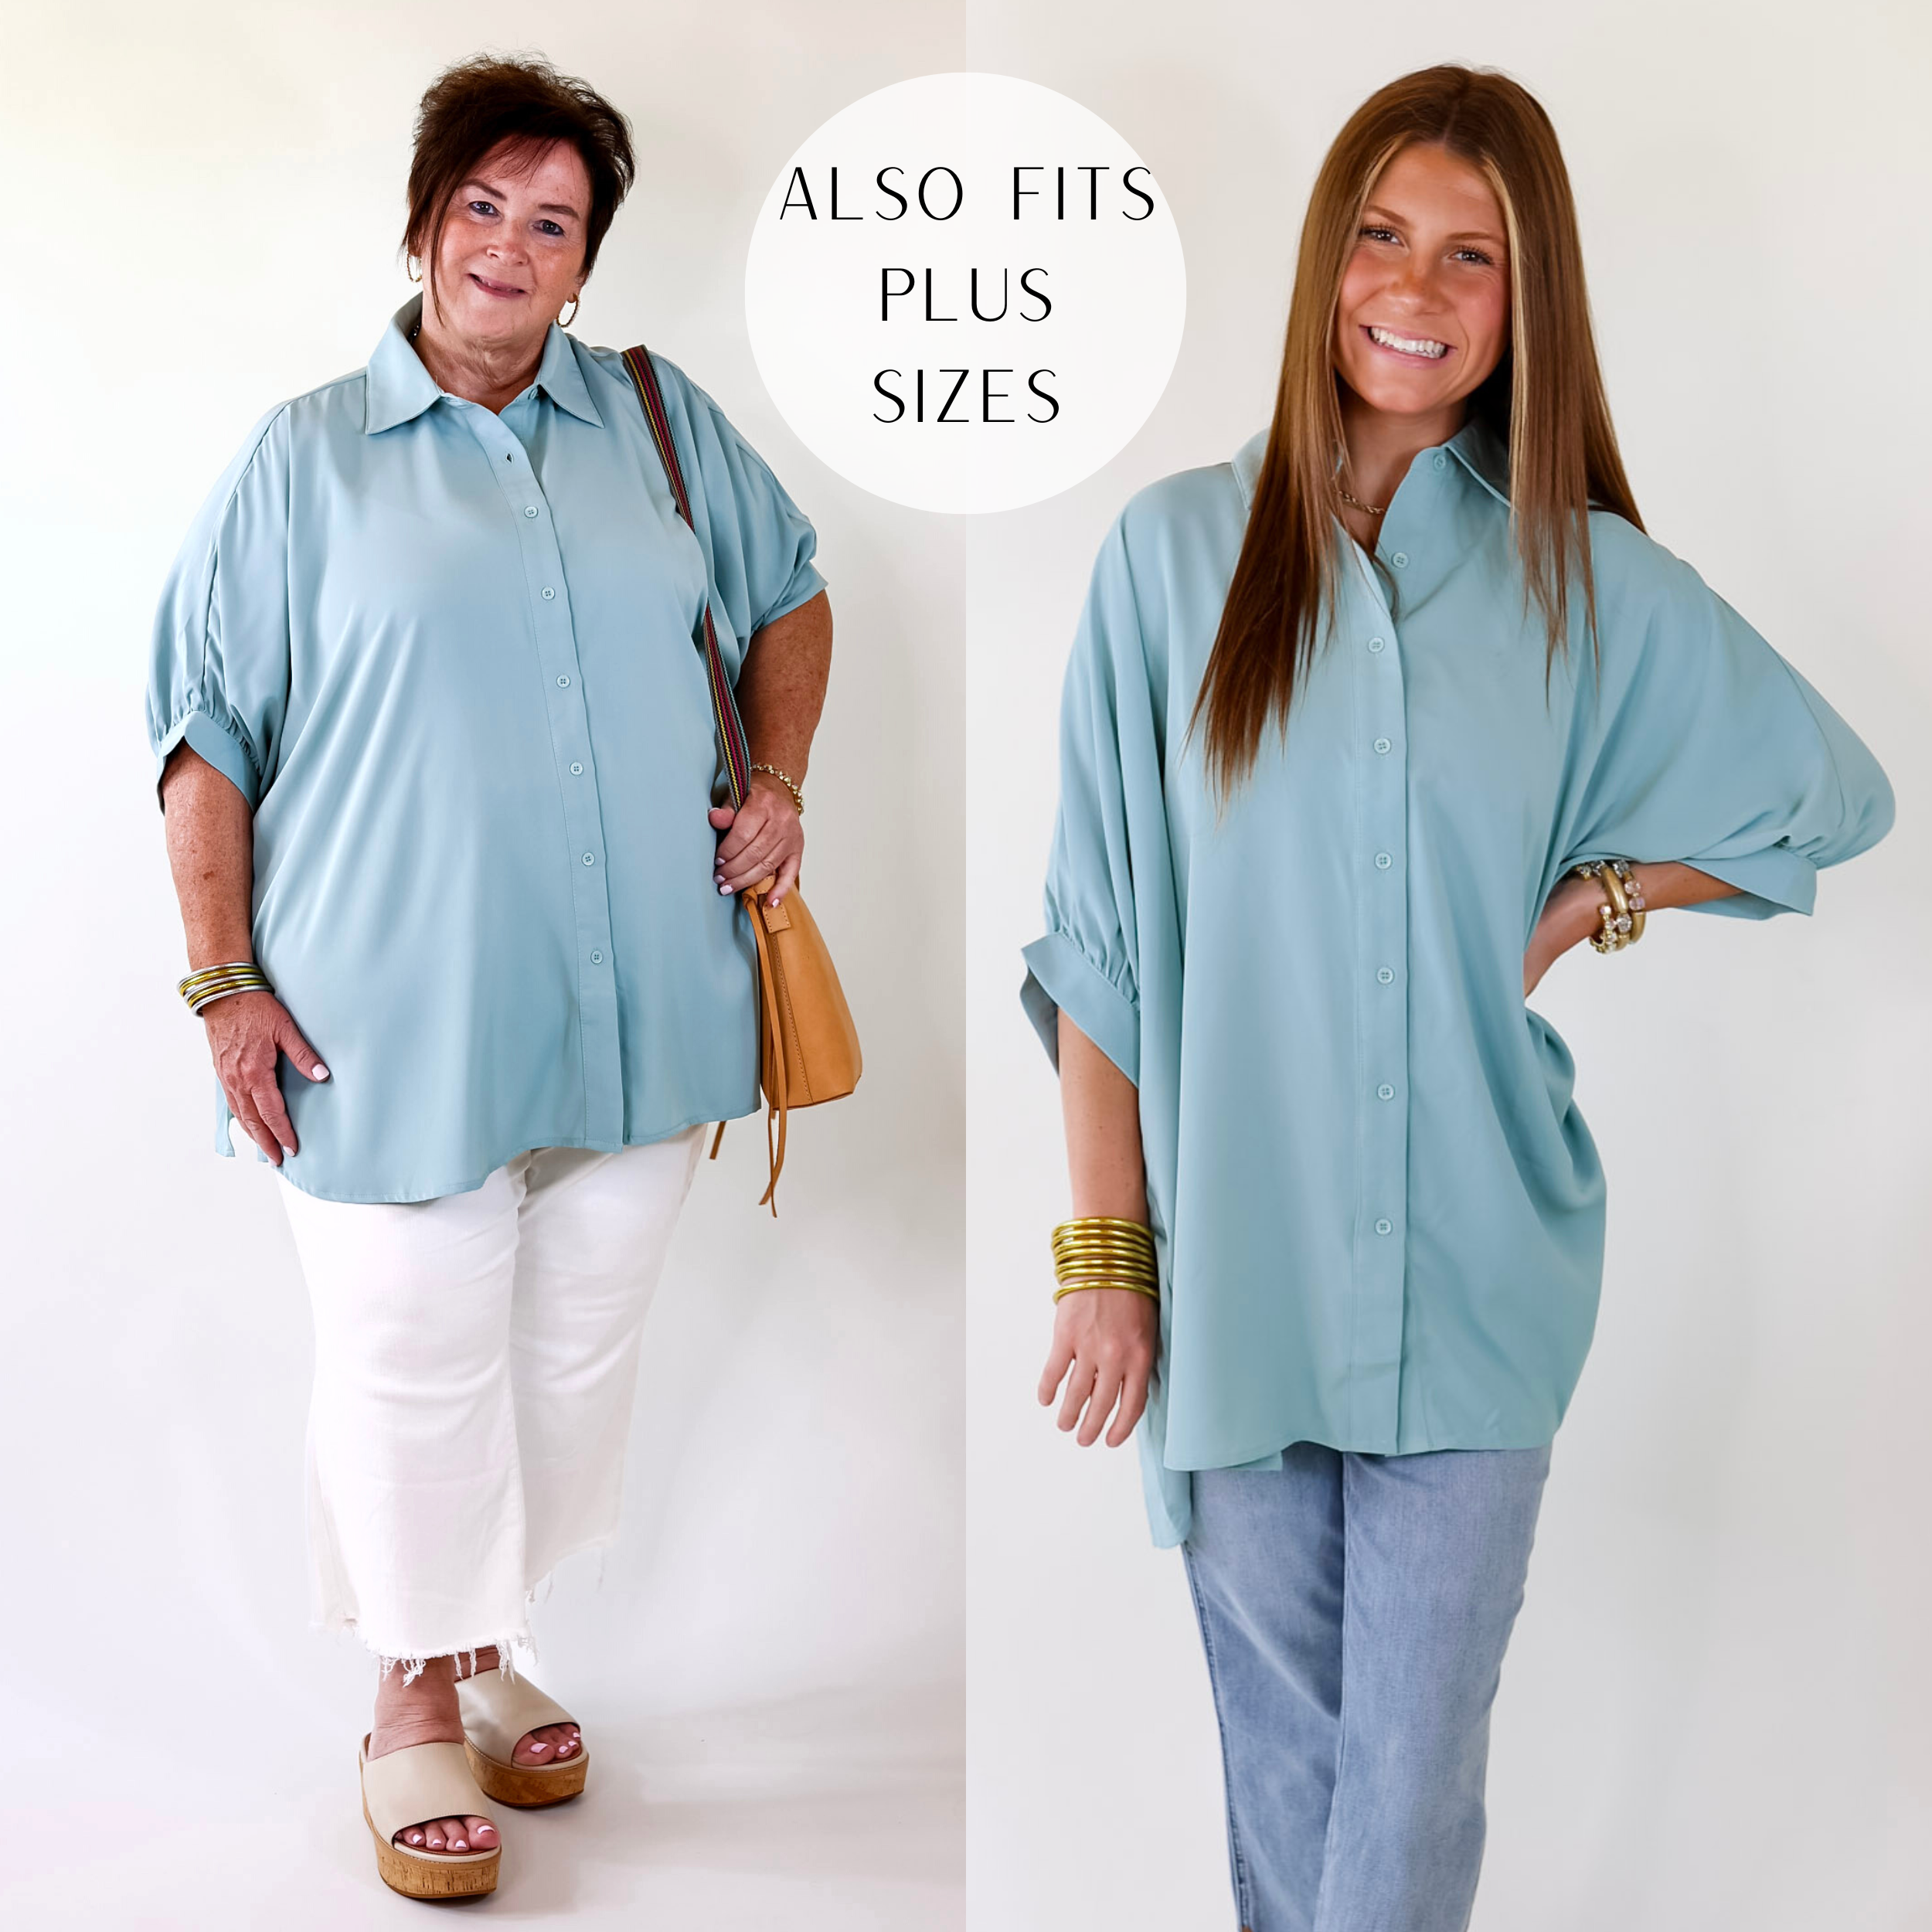 Model is wearing a seafoam blue button up top with half sleeves and a collar